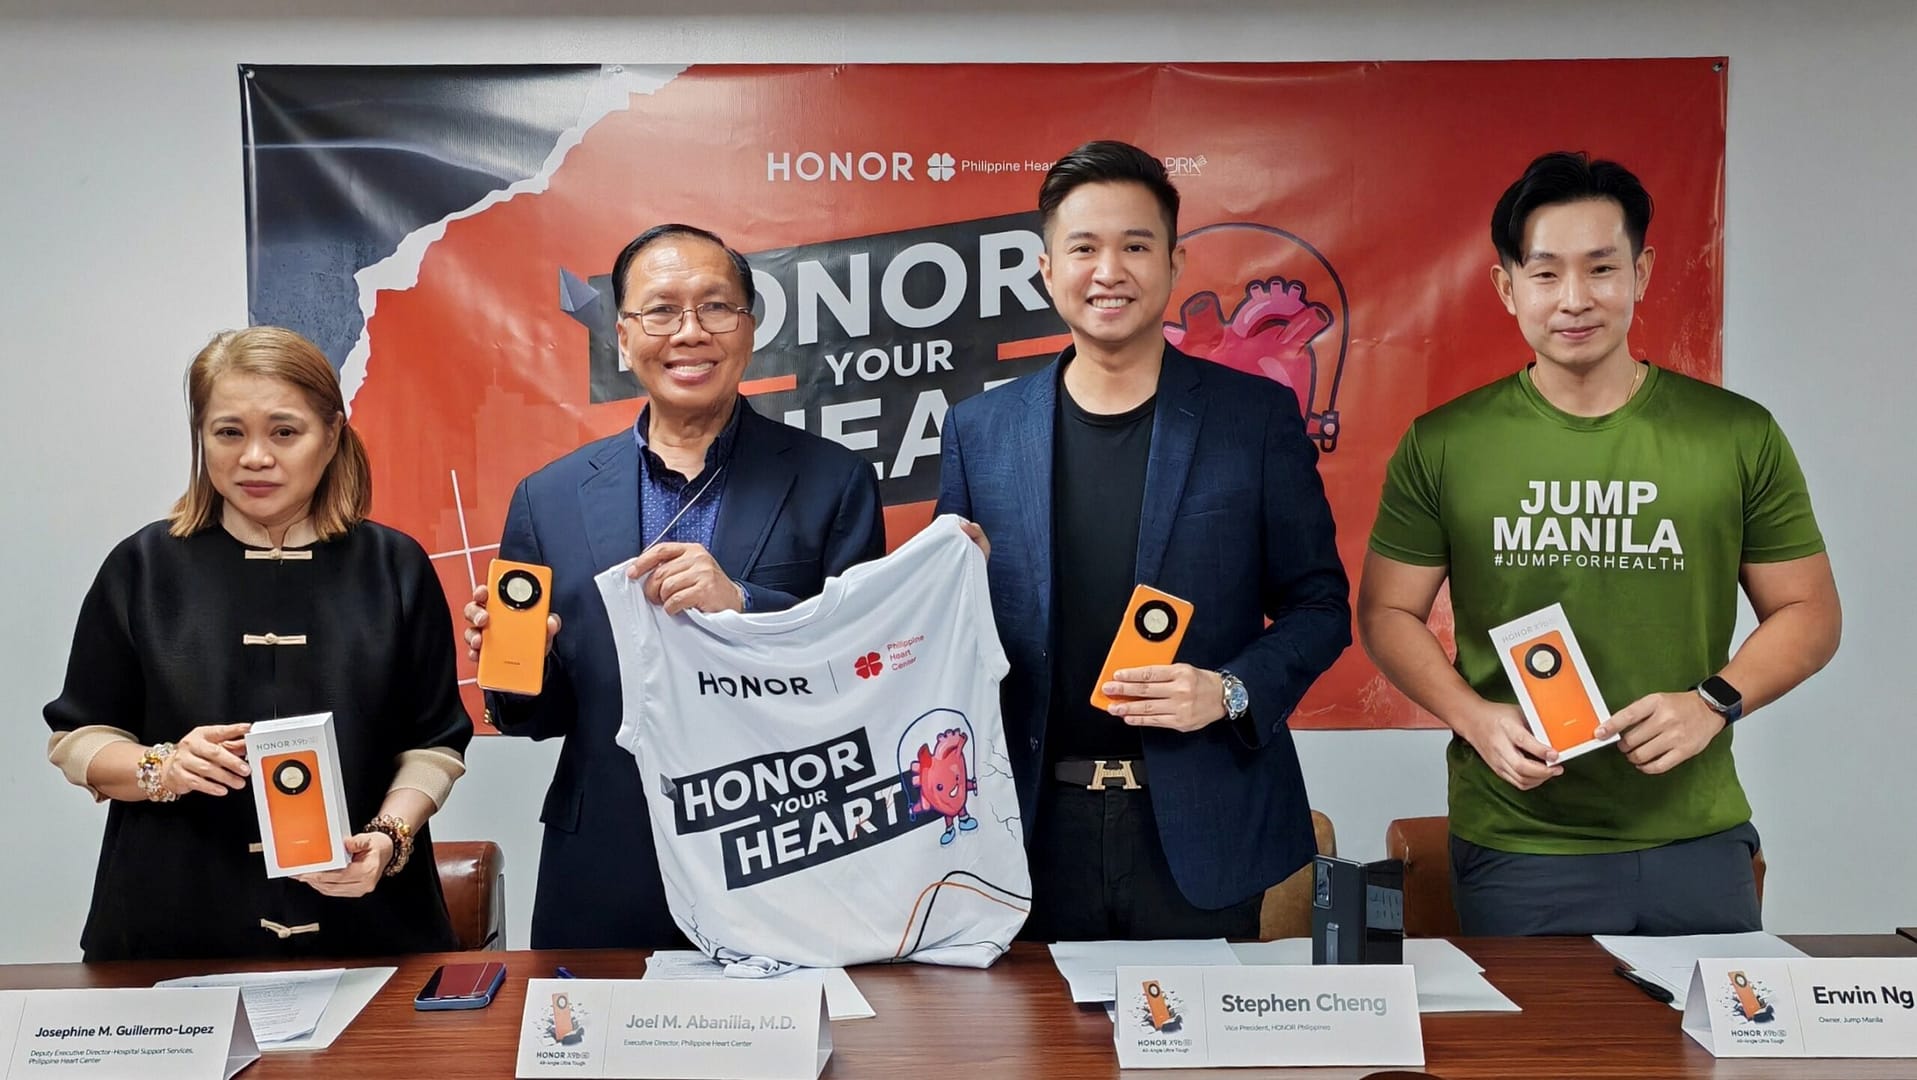 [L-R] Present at the MOU signing were Ms. Josephine M. Guillermo-Lopez, Deputy Executive Director – Hospital Support Services, Philippine Heart Center; Dr. Joel M. Abanilla, Executive Director, Philippine Heart Center; Stephen Cheng, Vice President of HONOR Philippines; and Erwin Ng, Owner of Jump Manila.